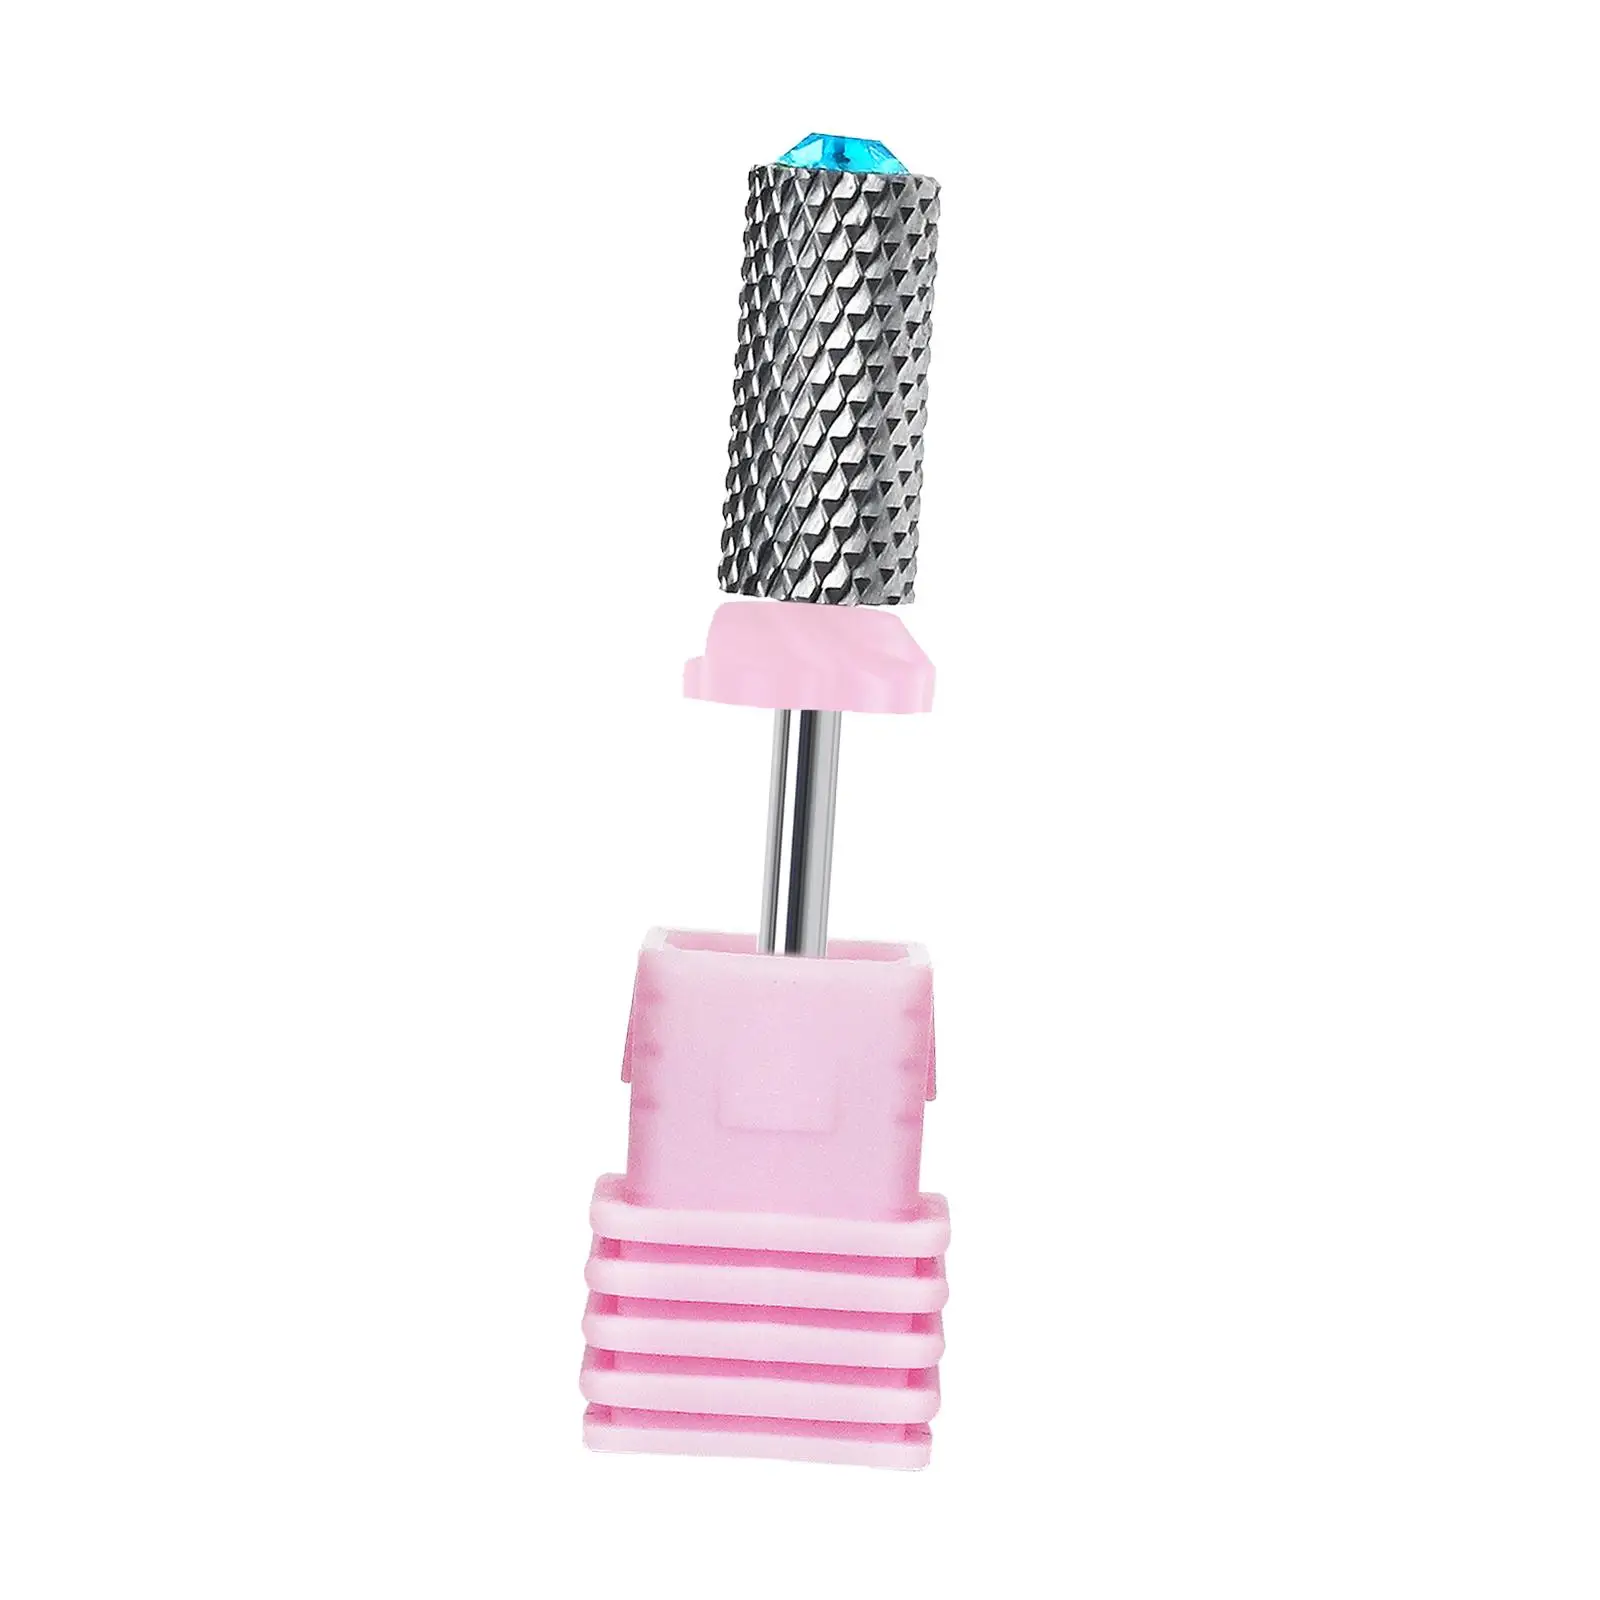 Nail Drill Bit Accessory Rotary Burrs Cuticle Remover Bit for Manicure Tool